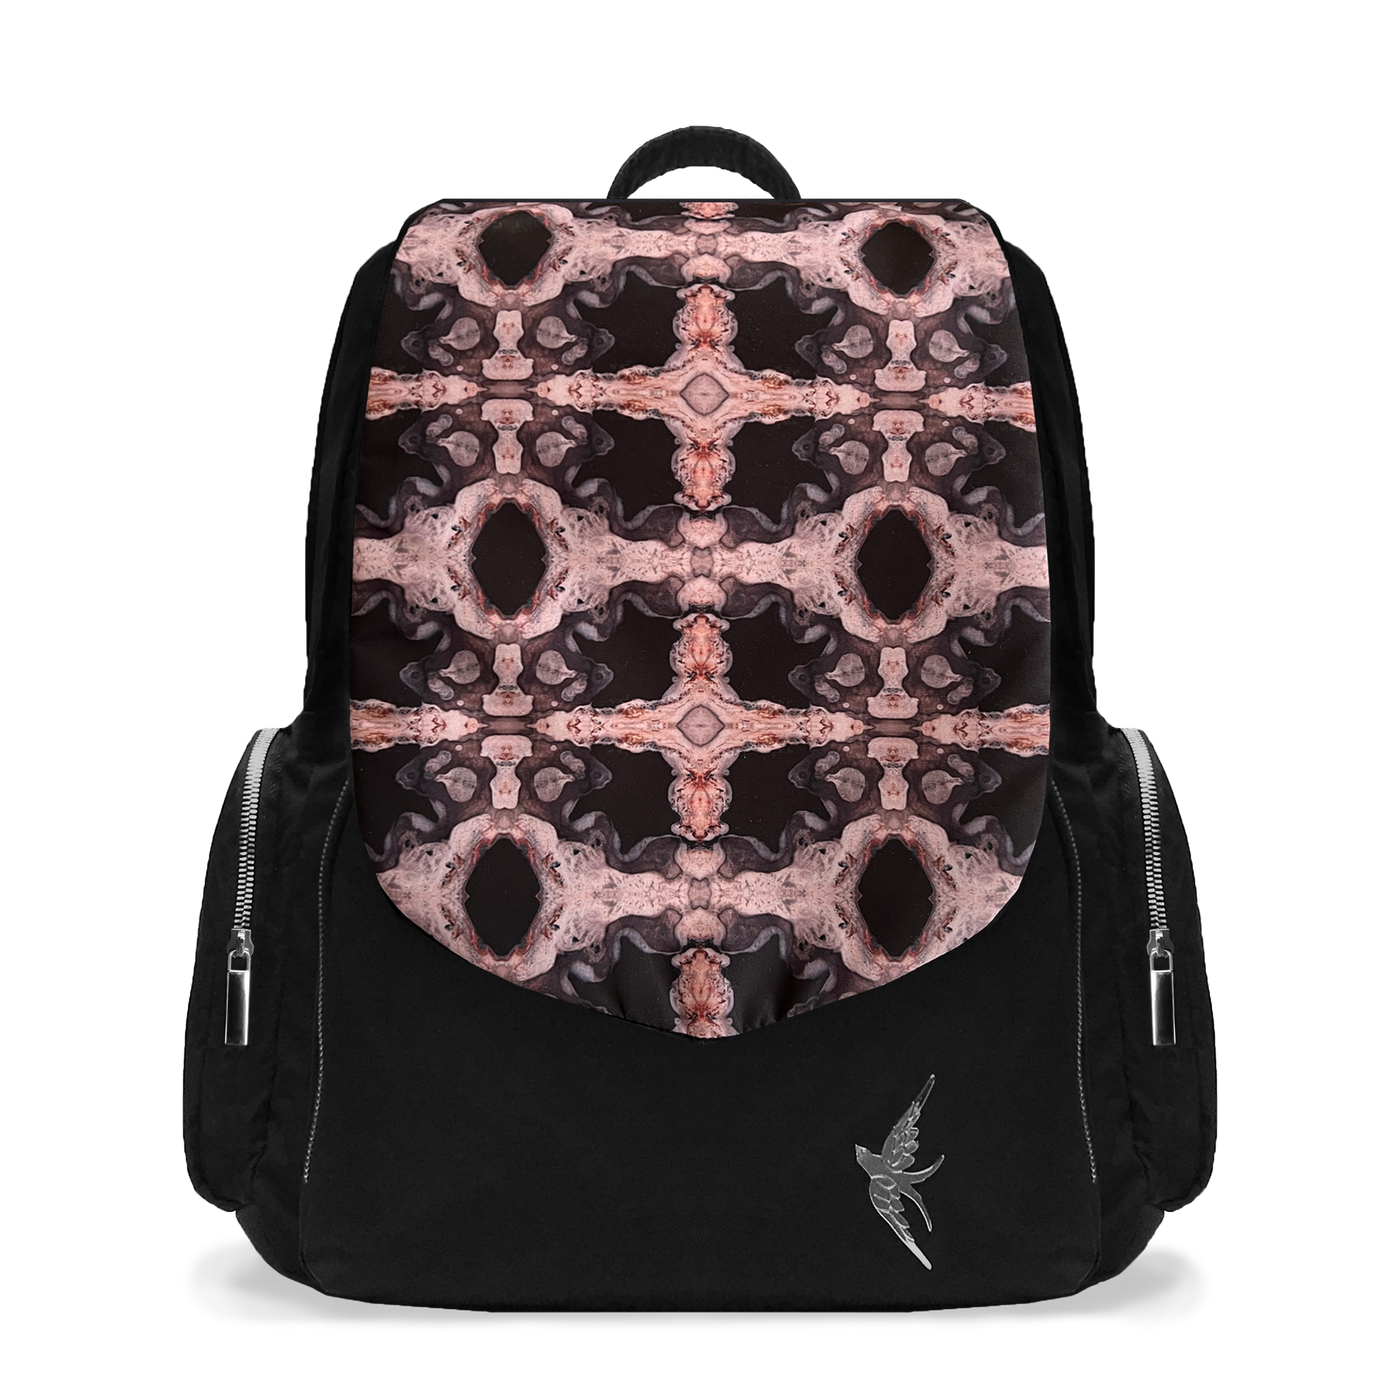 Laptop Backpack with the Boho Buff Print